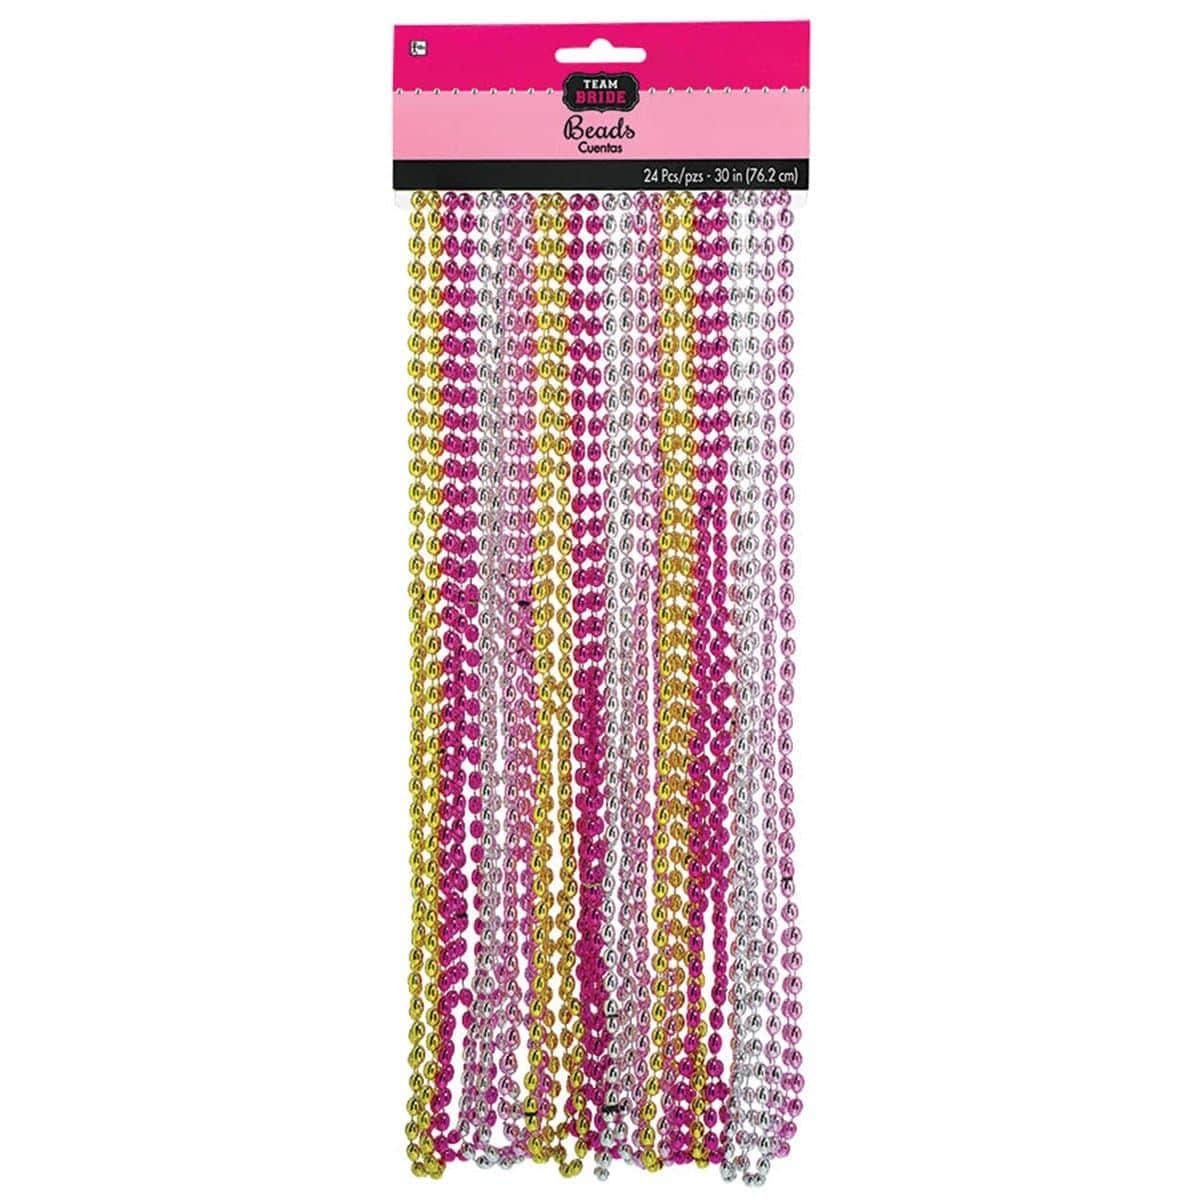 Buy Bachelorette Team Bride beaded necklaces, 24 per package sold at Party Expert